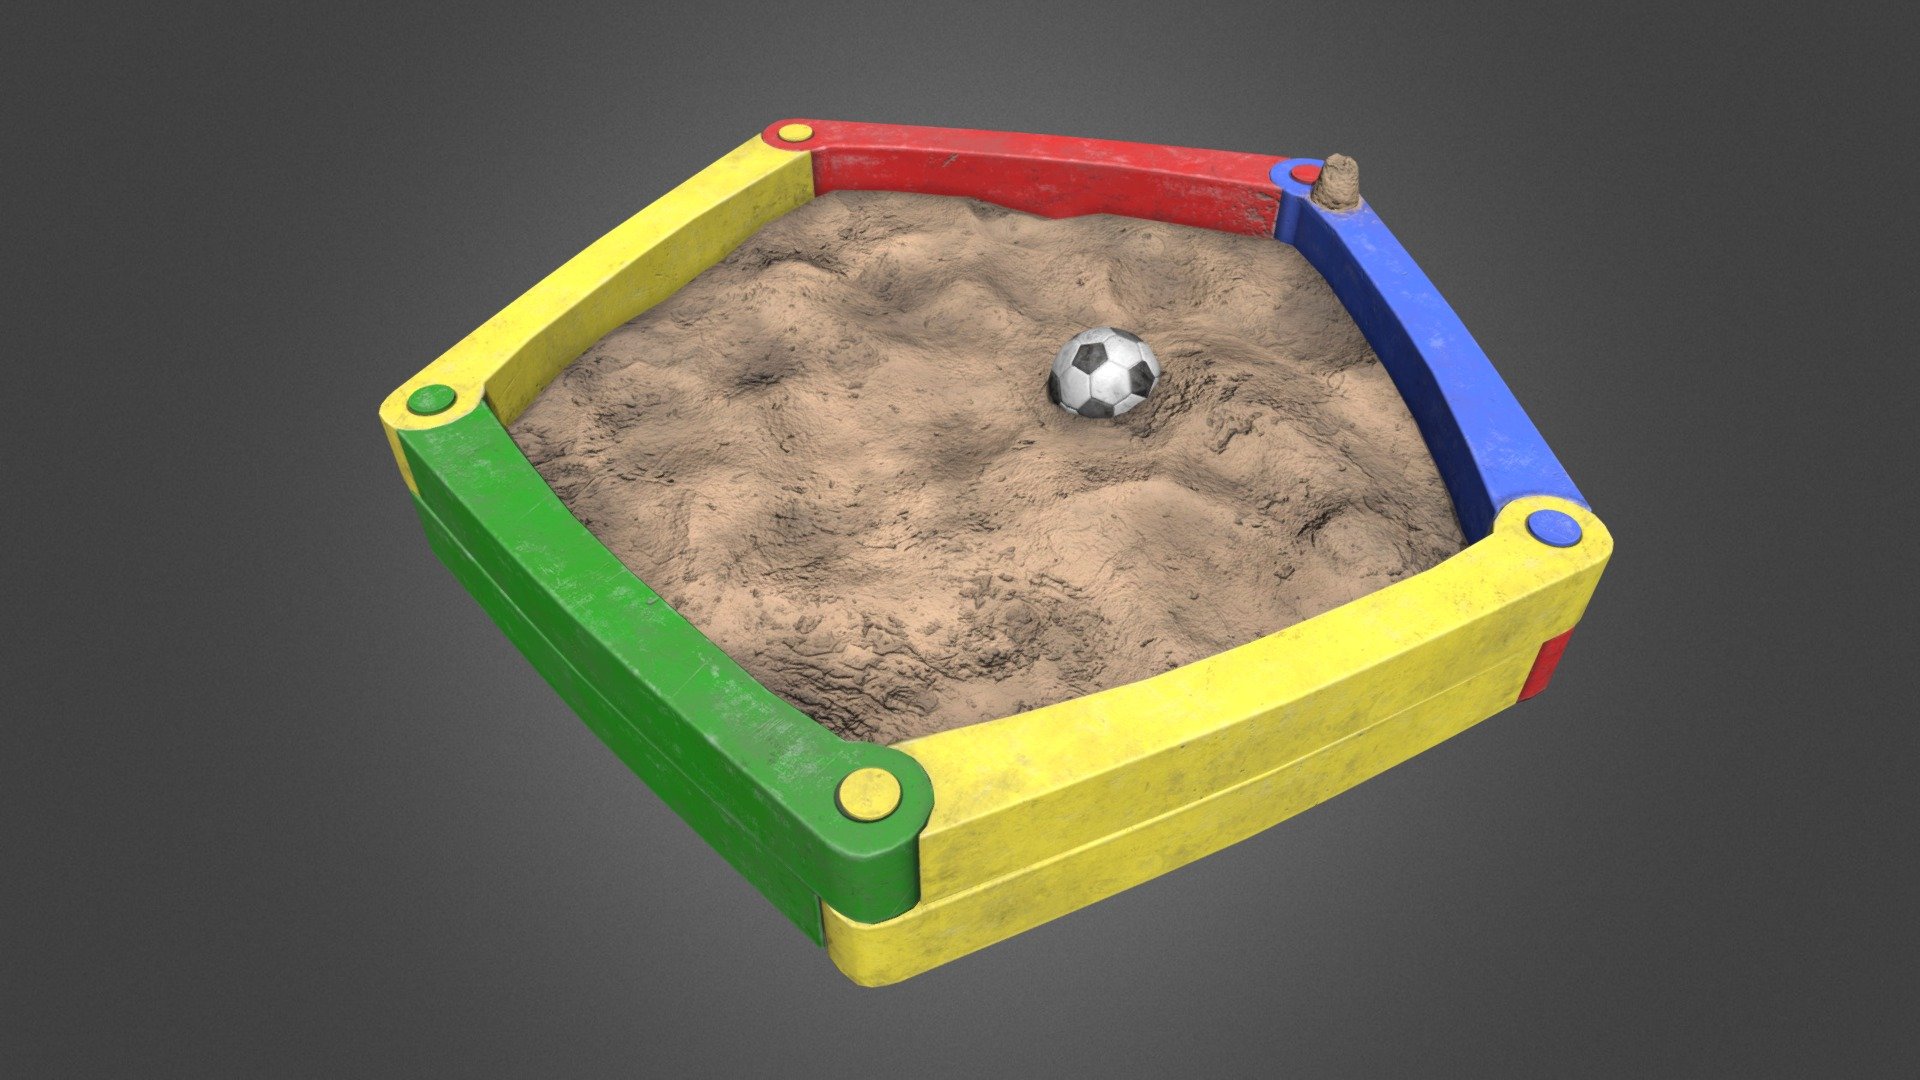 Low-poly, Game-ready model of a playground's sandbox.

TEXTURES

High resolution PBR Metal/Roughness textures are provided in the additional files.

Texture size: 2048 x 2048
Texture format: PNG 8 bit (uncompressed)




Base Color (Diffuse)

Metallic

Roughness

Height

Normal 

Ambient Occlusion

This asset is part of our Playground series which contains many more models to re-create the perfect playground for your projects!

Check out all our Playground models here - Playground Plastic Sand Pit - Buy Royalty Free 3D model by Ringtail Studios (@ringtail) 3d model